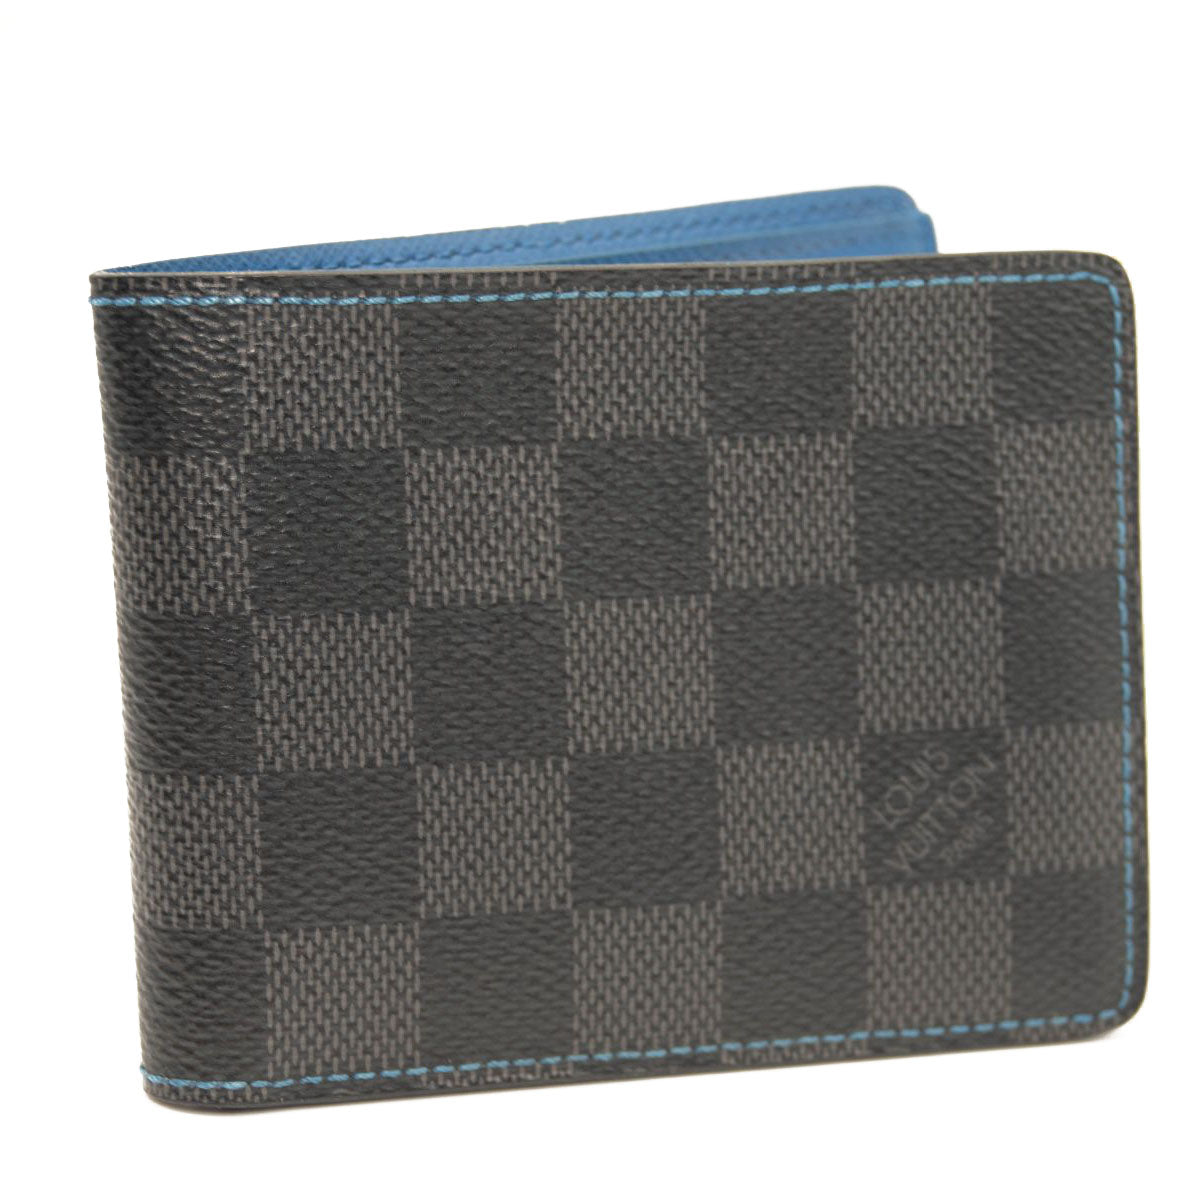 Products by Louis Vuitton: Slender Wallet